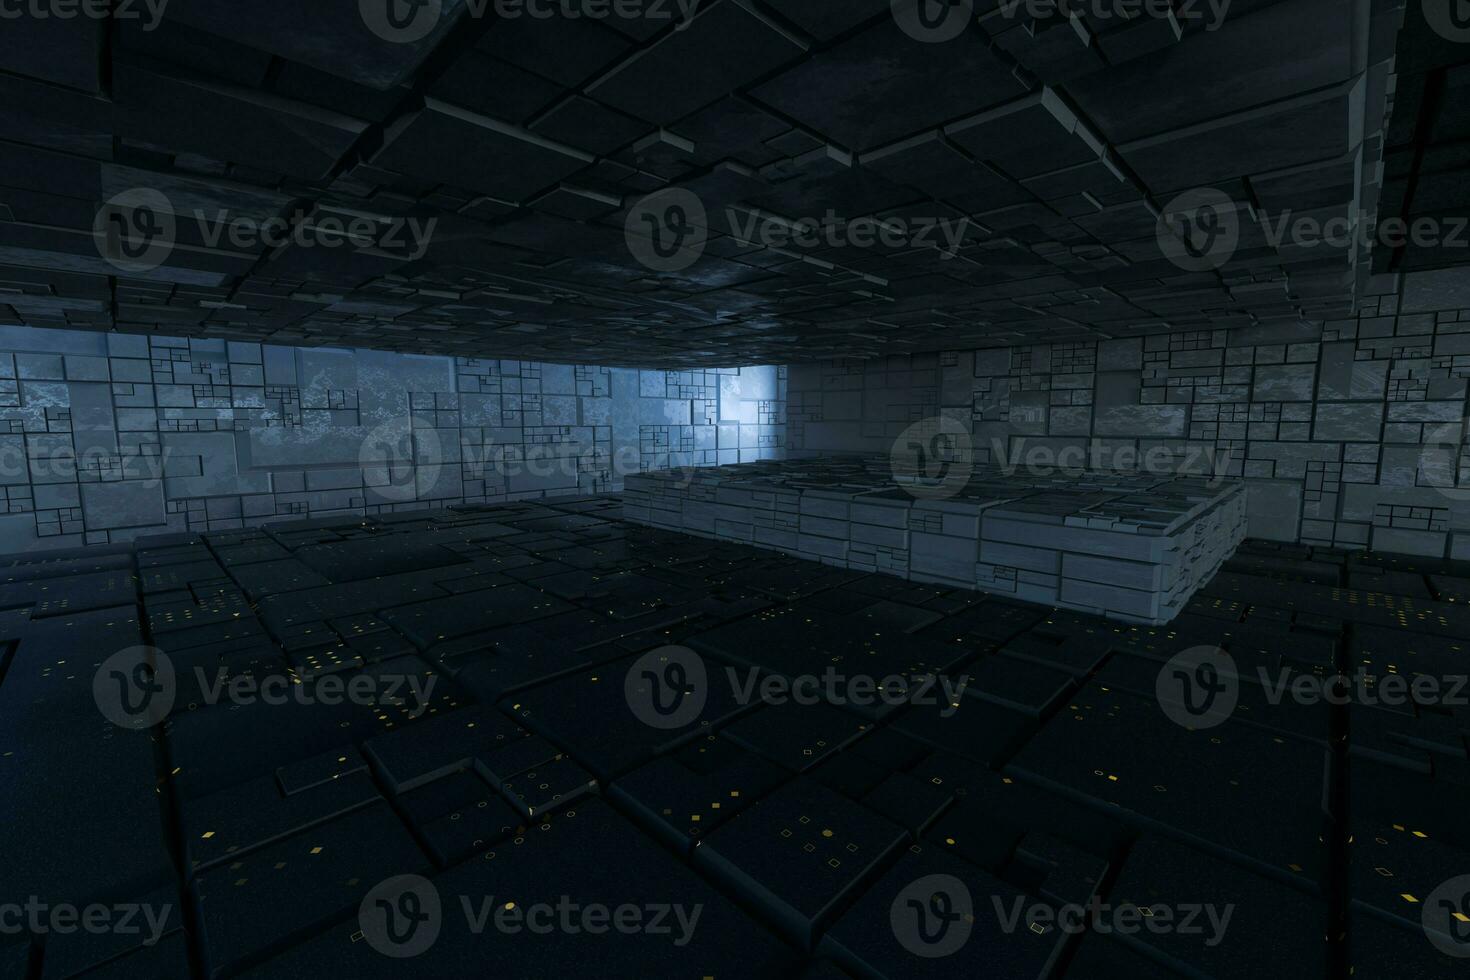 Dark ruins with circuit texture wall, sci-fi architecture background, 3d rendering. photo